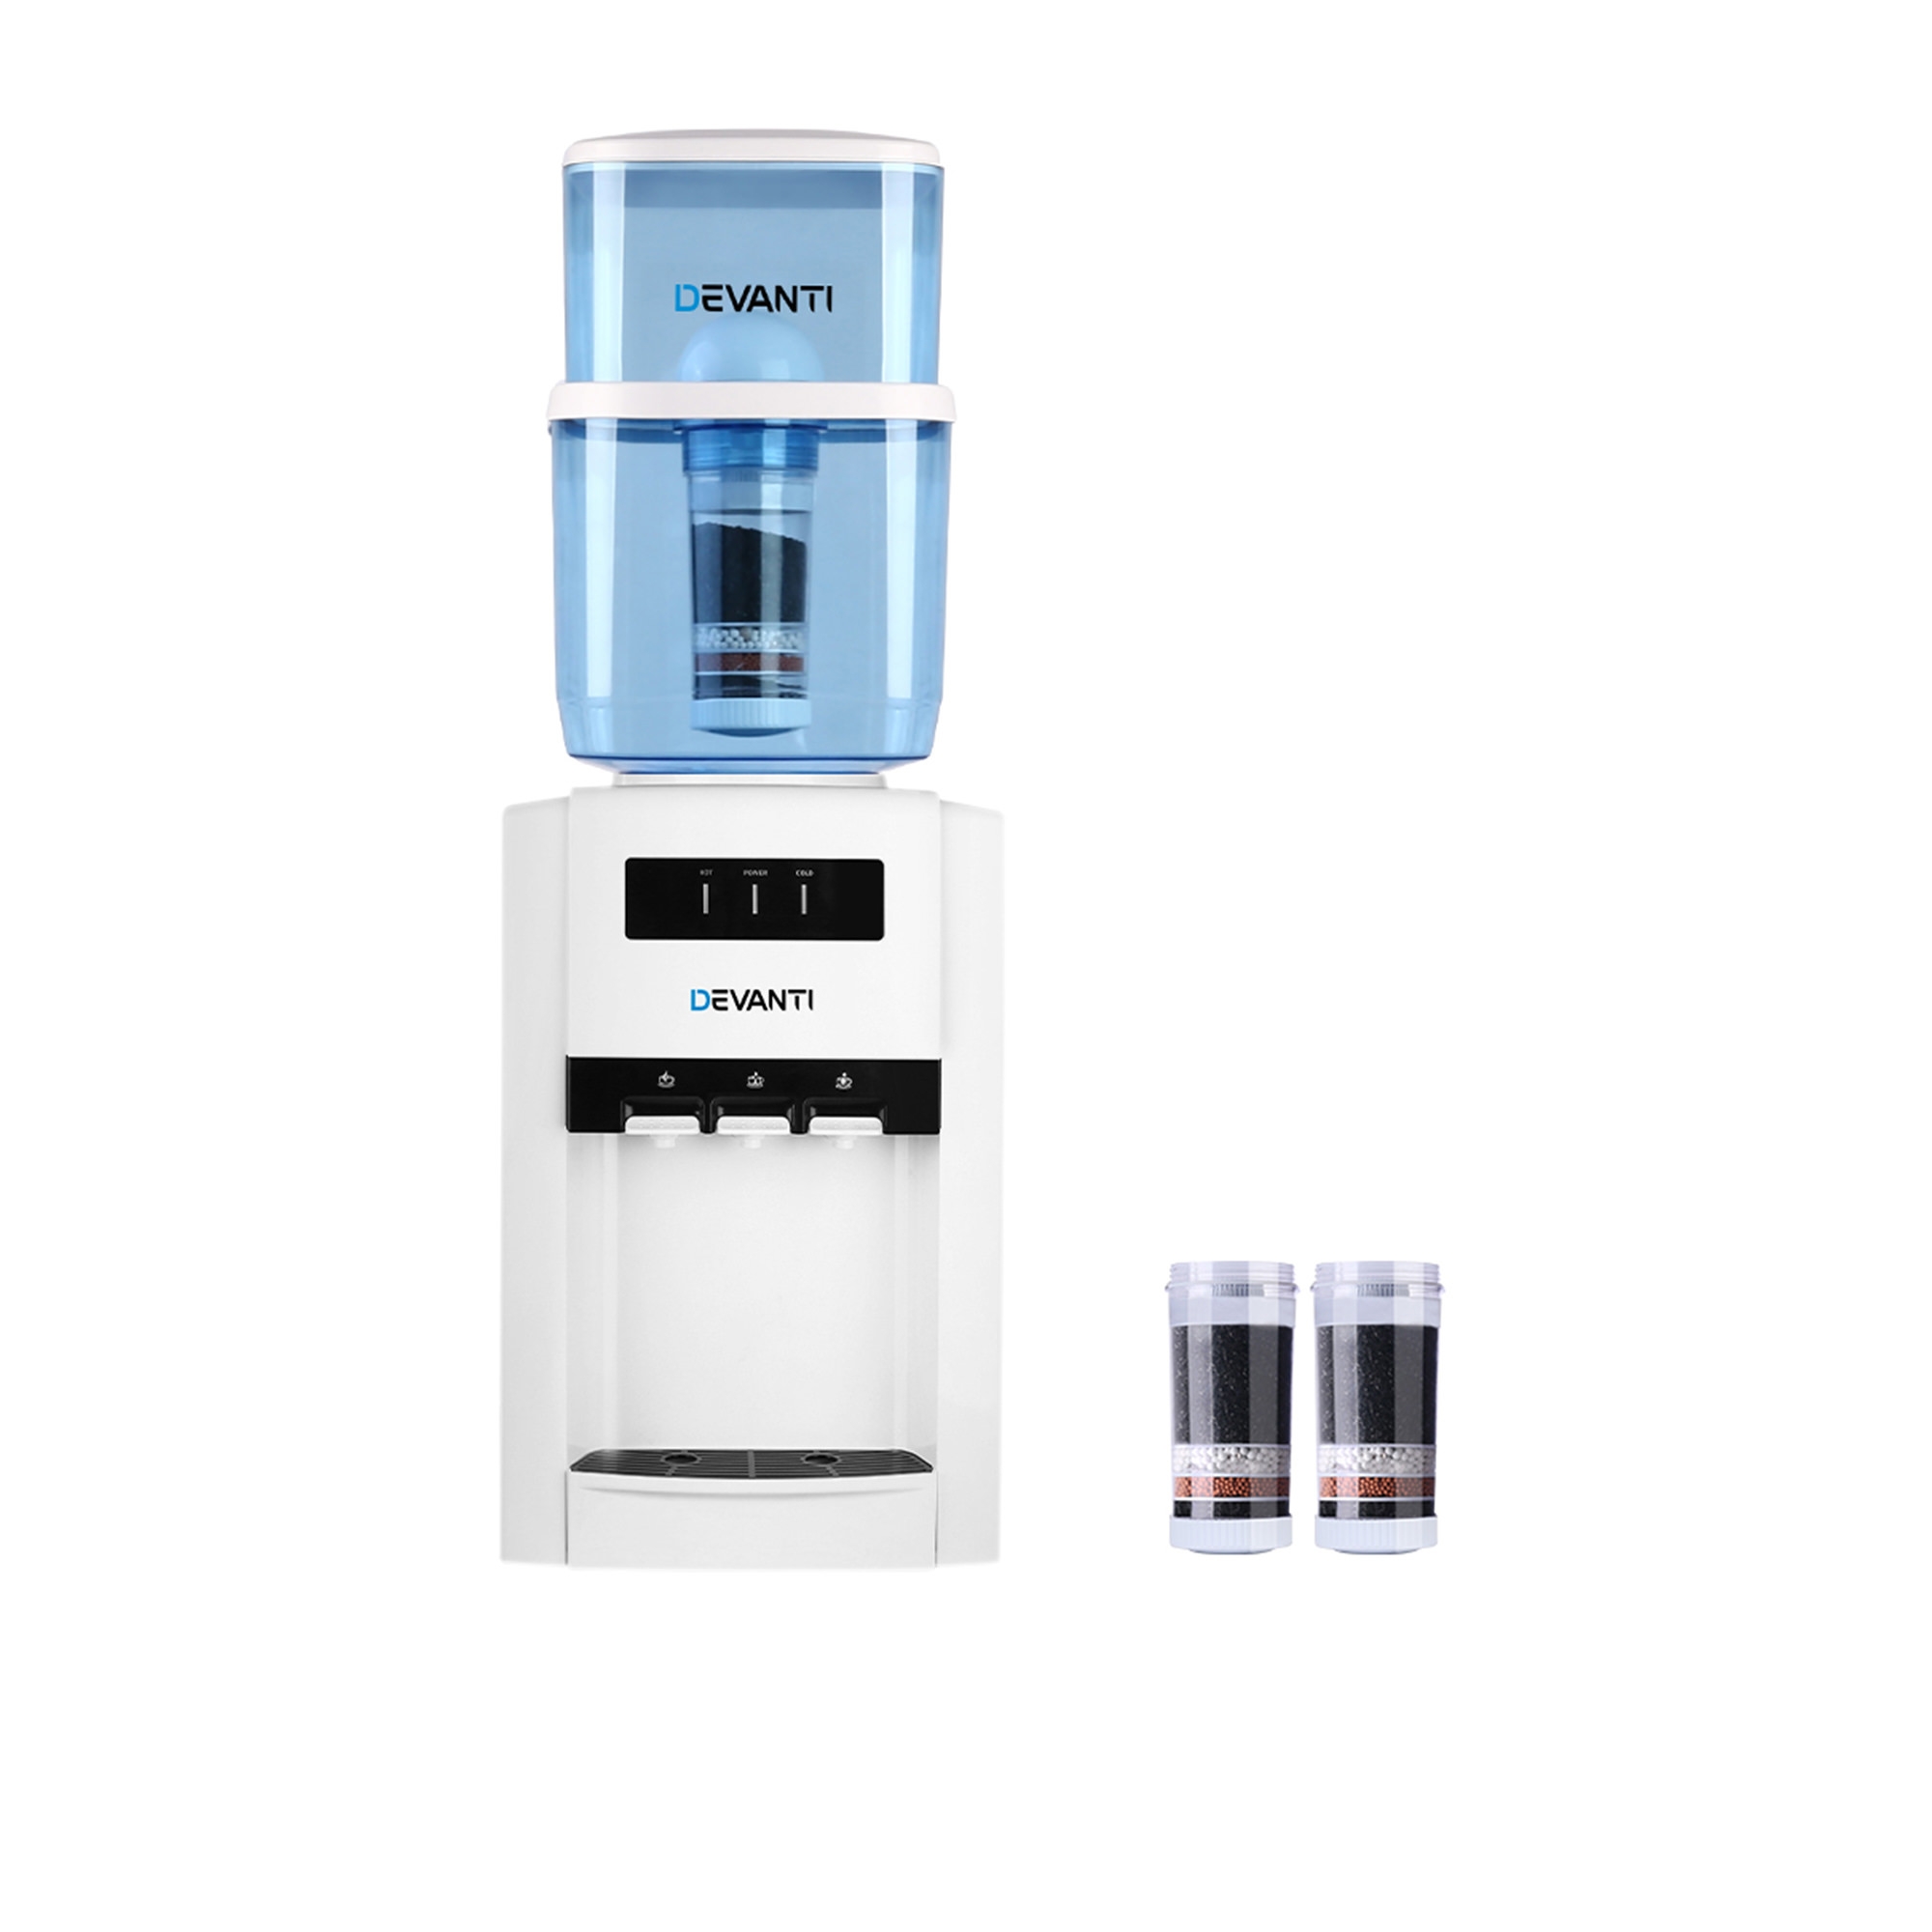 Devanti Benchtop Water Dispenser with 2 Spare Filters 22L Image 1